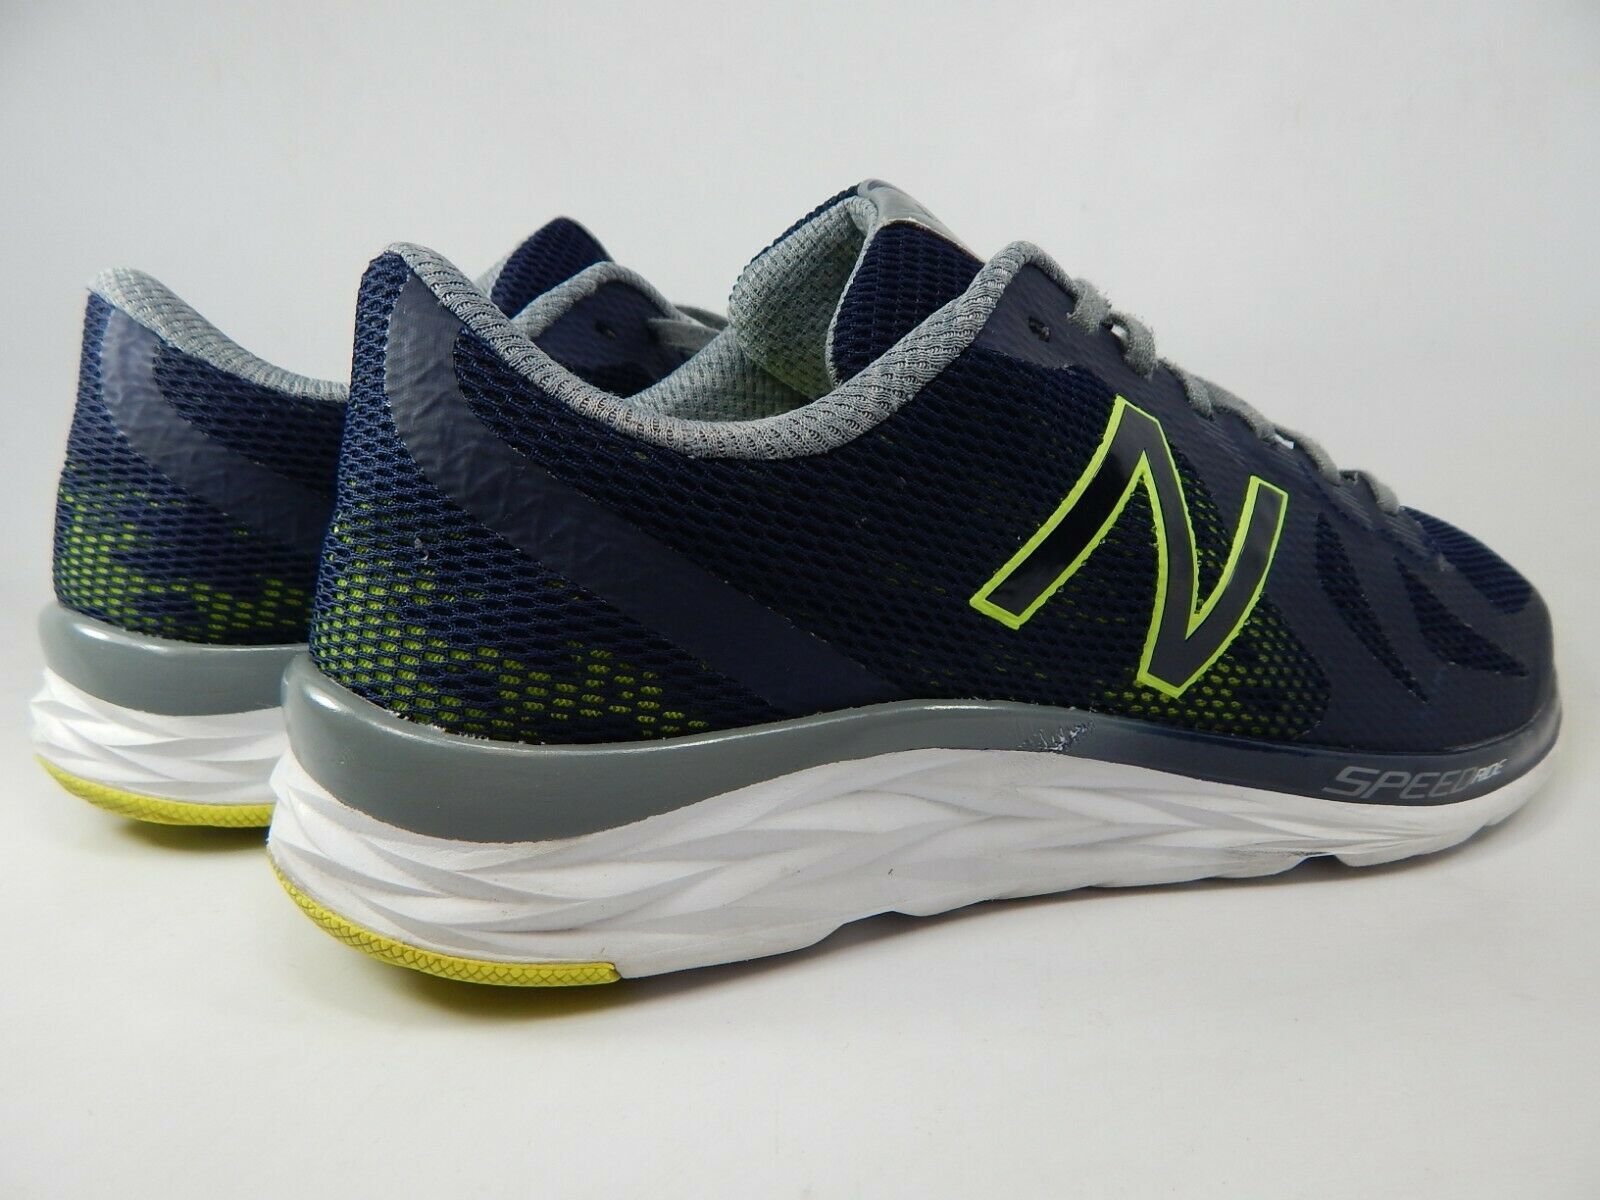 New balance 790 v6 Taille US 9.5 M (D) Eu 43 Homme Chaussures Course ...